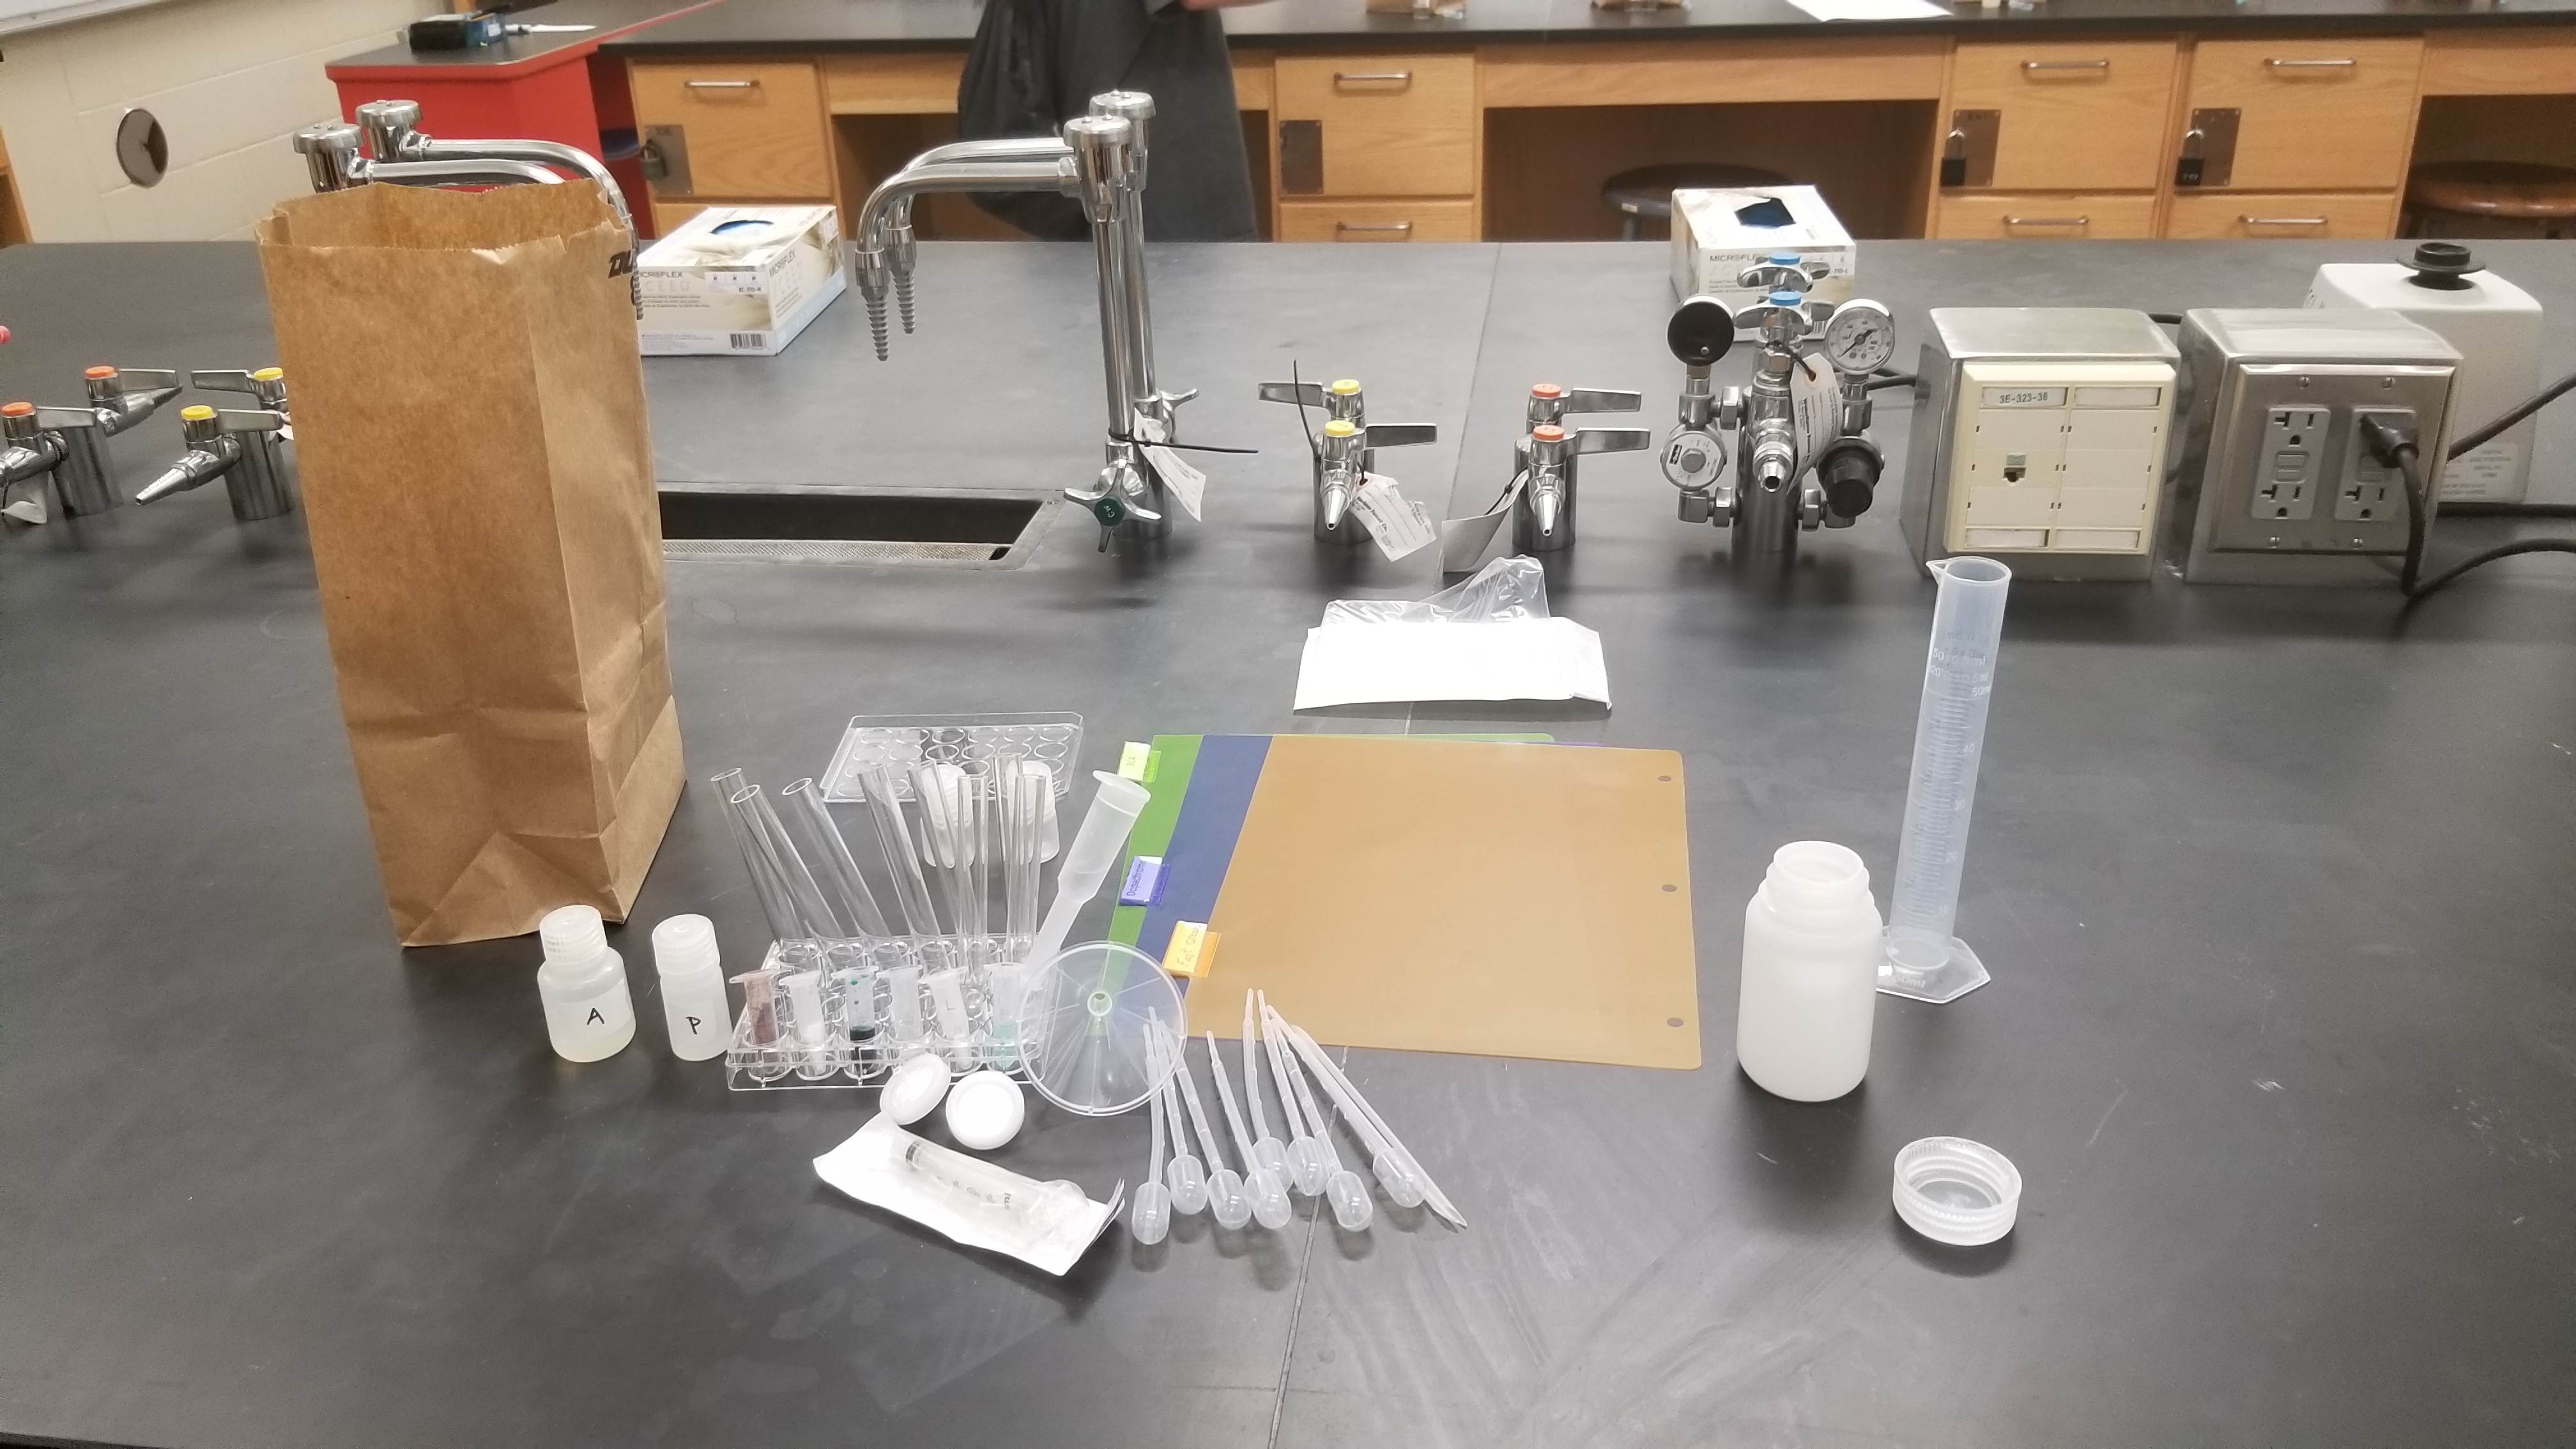 Items in the kit that students will take home to conduct experiments.